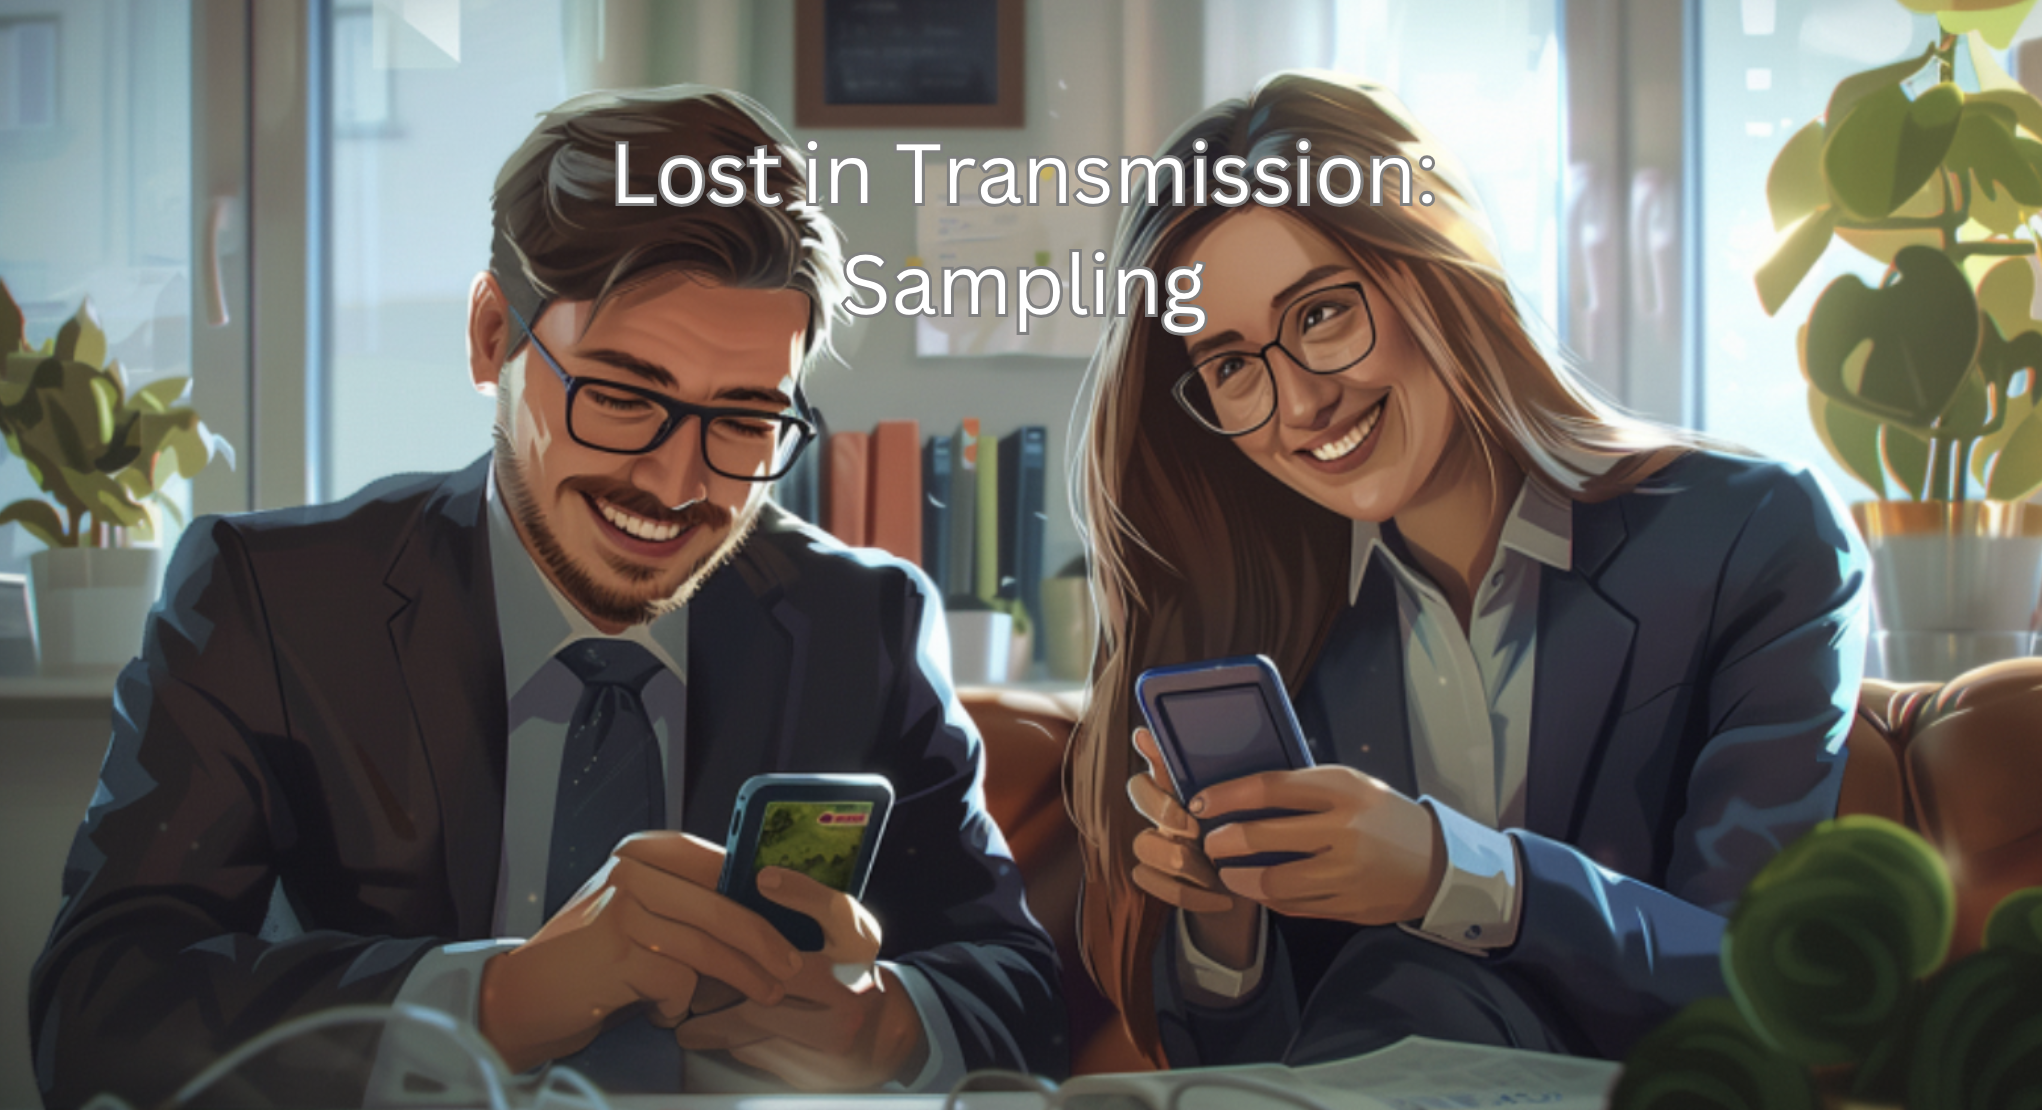 Lost in Transmission: The “Telephone Game” of Sample Requests in Market Research